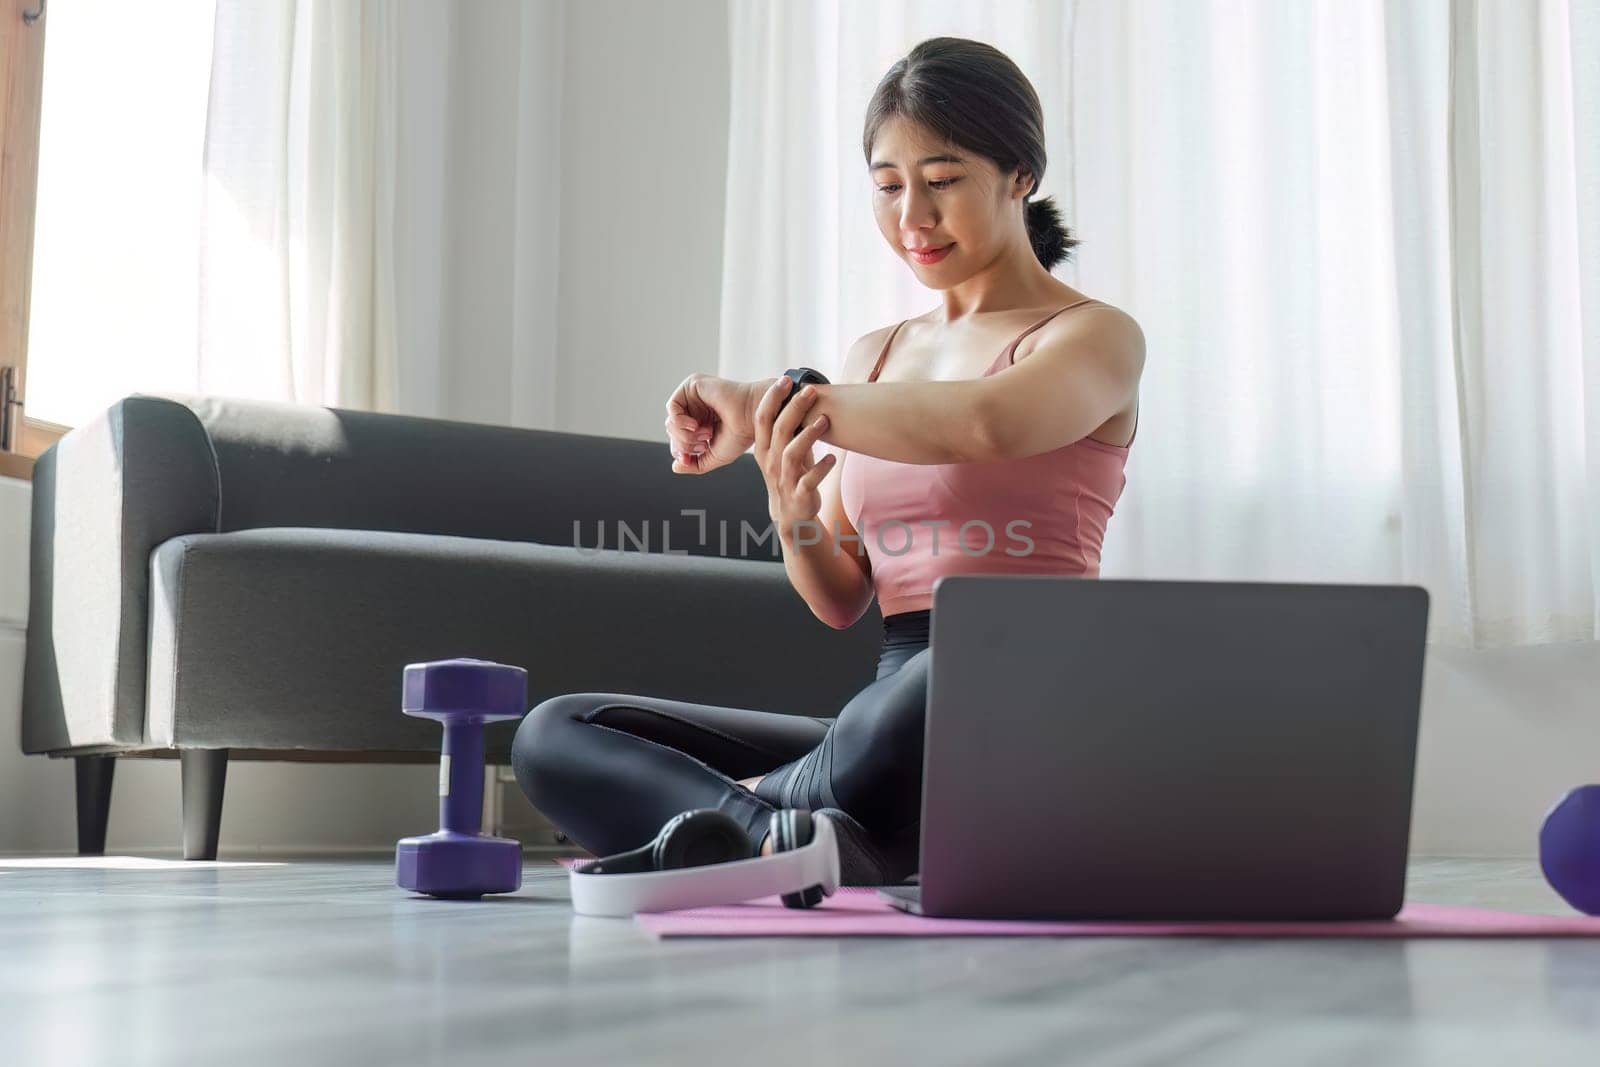 A young woman sits and looks at a smartwatch while exercising in front of her laptop. Wear a sports bar outfit. Do yoga and lift dumbbells on the exercise mat. by wichayada